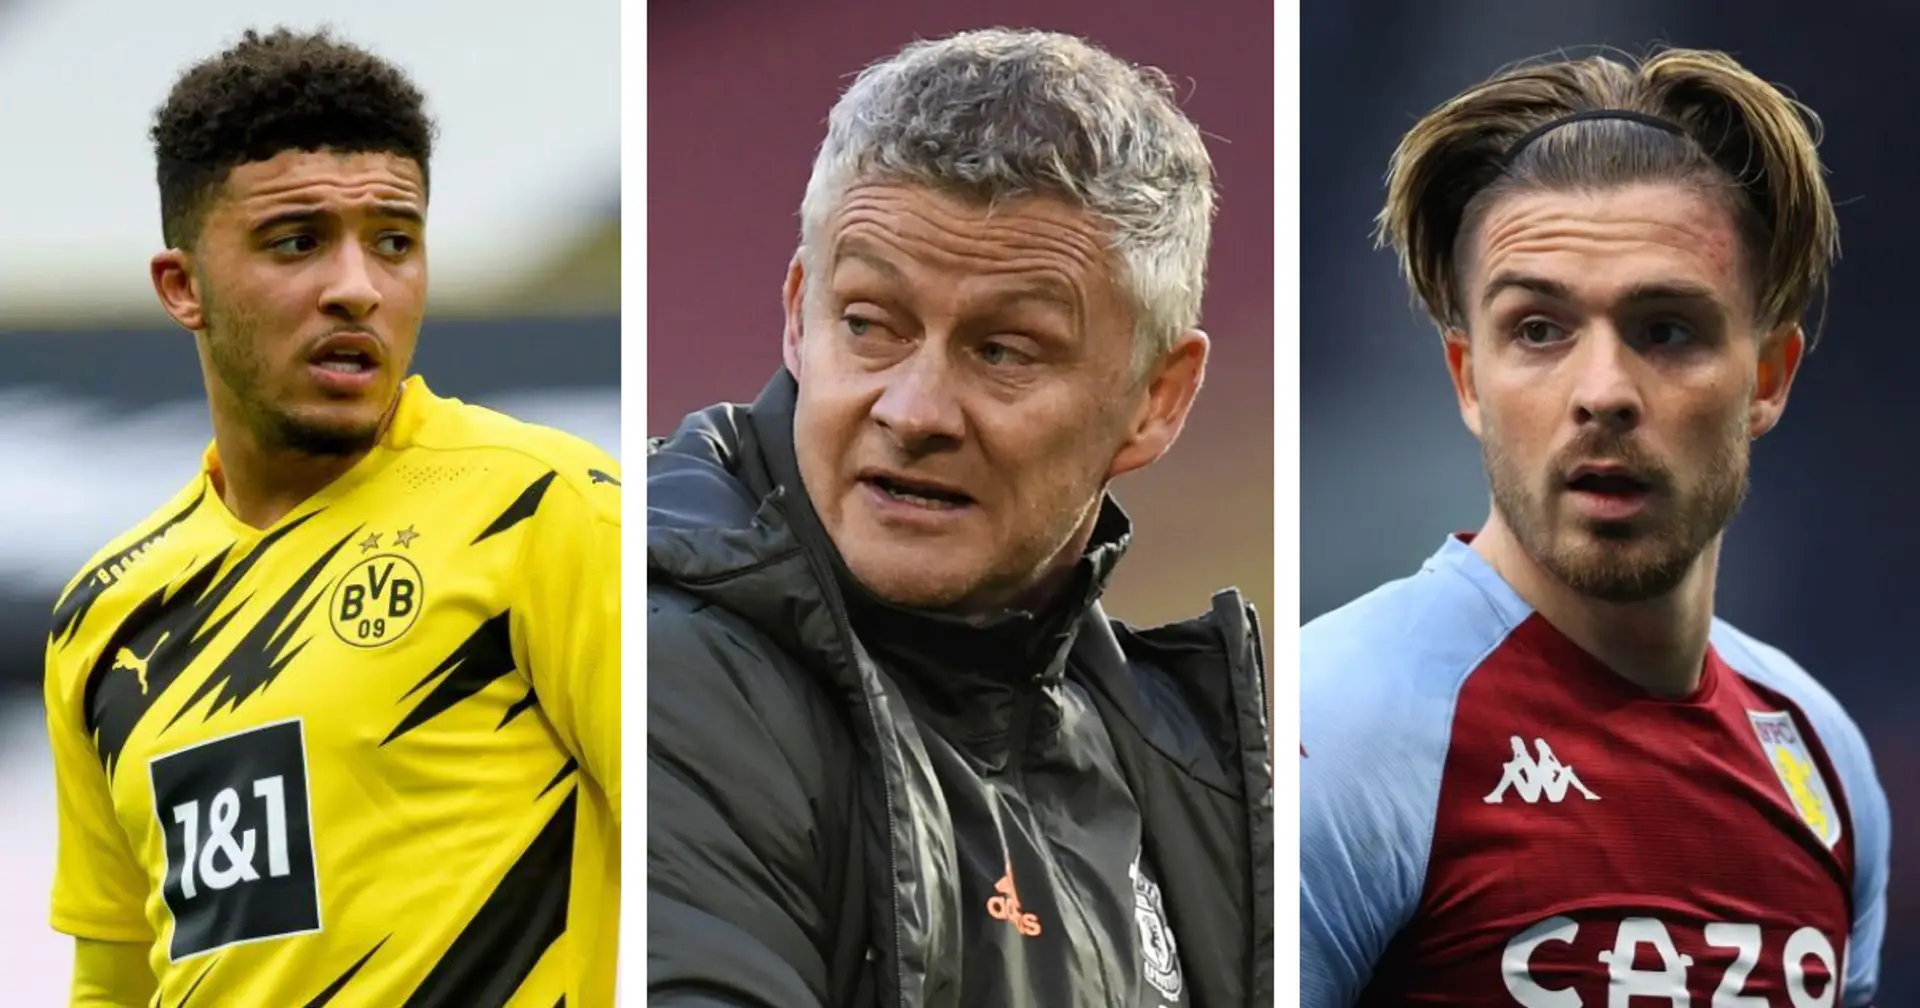 Telegraph: Solskjaer clashes with Man United players over Sancho — they want Grealish instead (reliability: 4 stars)